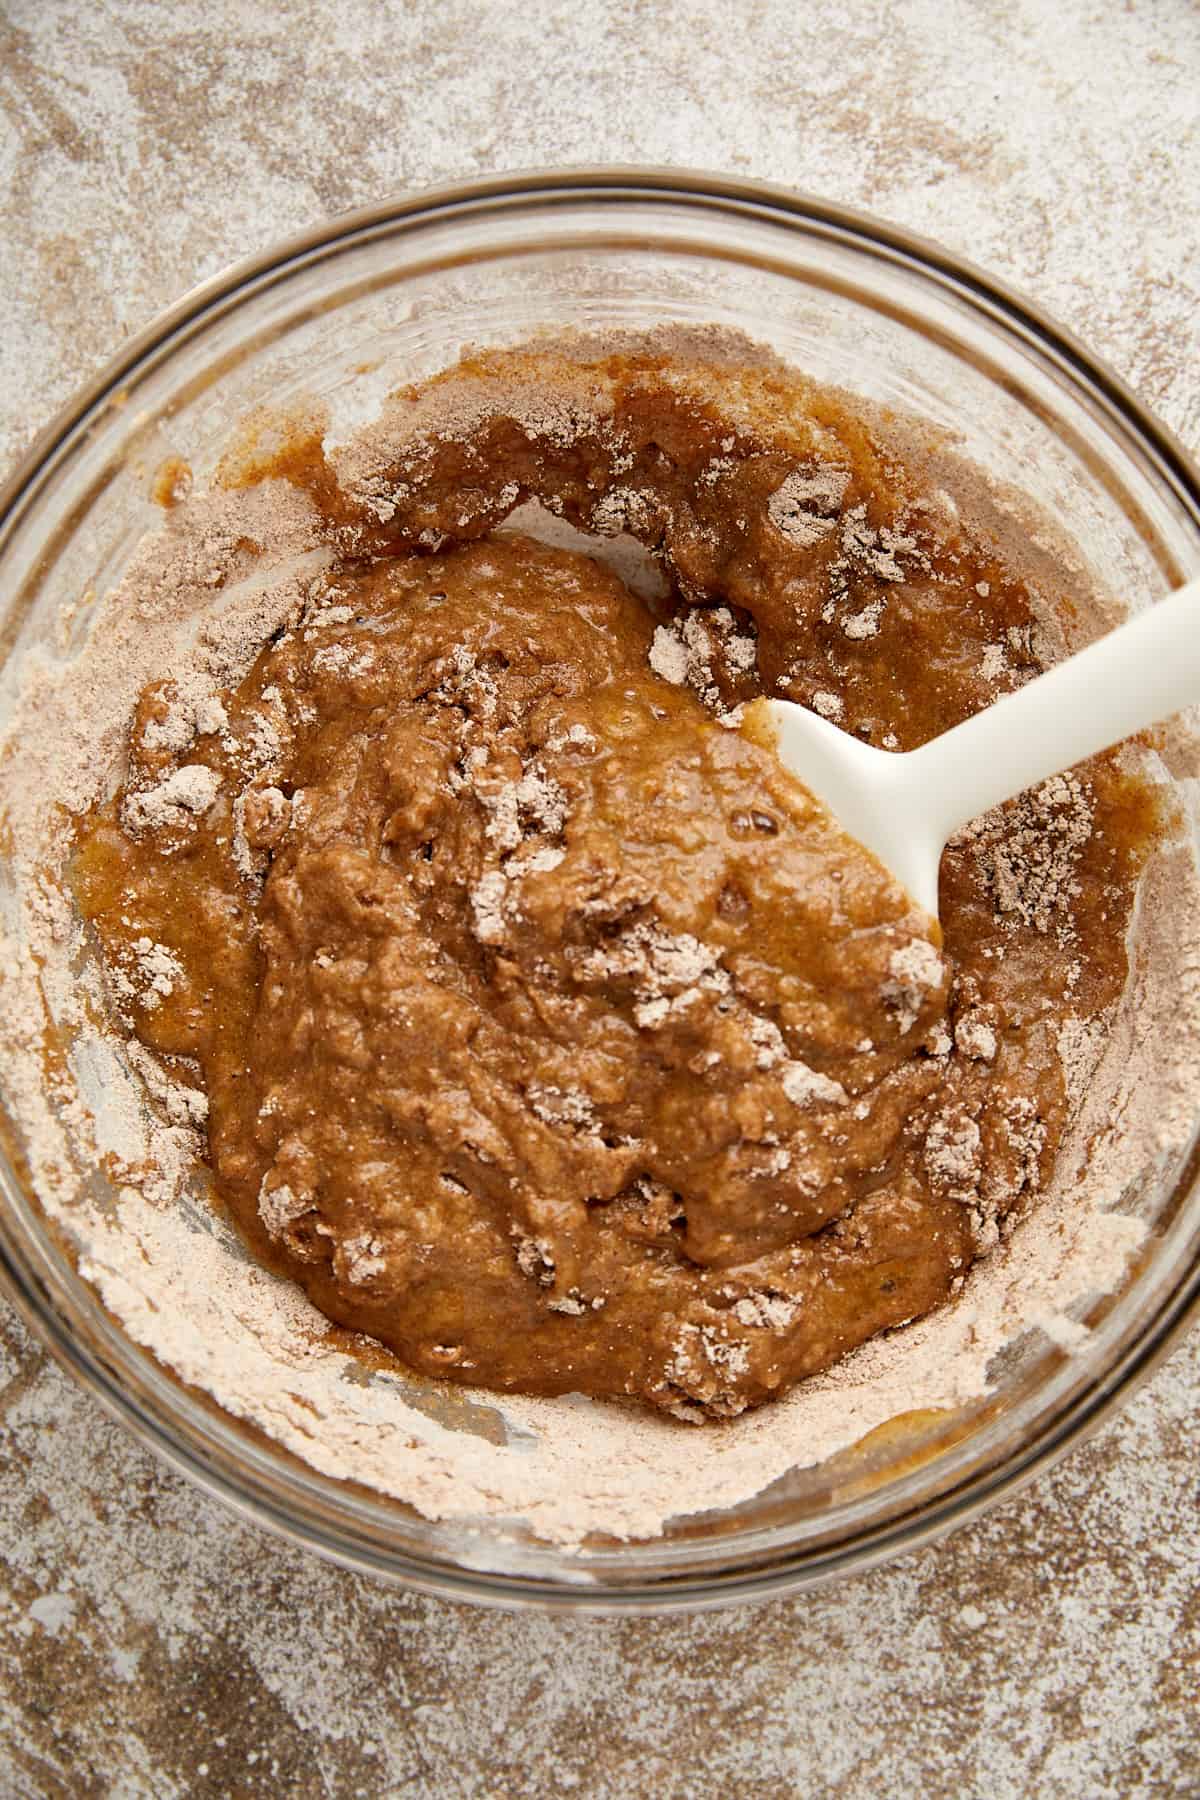 dry and wet ingredients mixed a few times with a spatula in glass bowl.